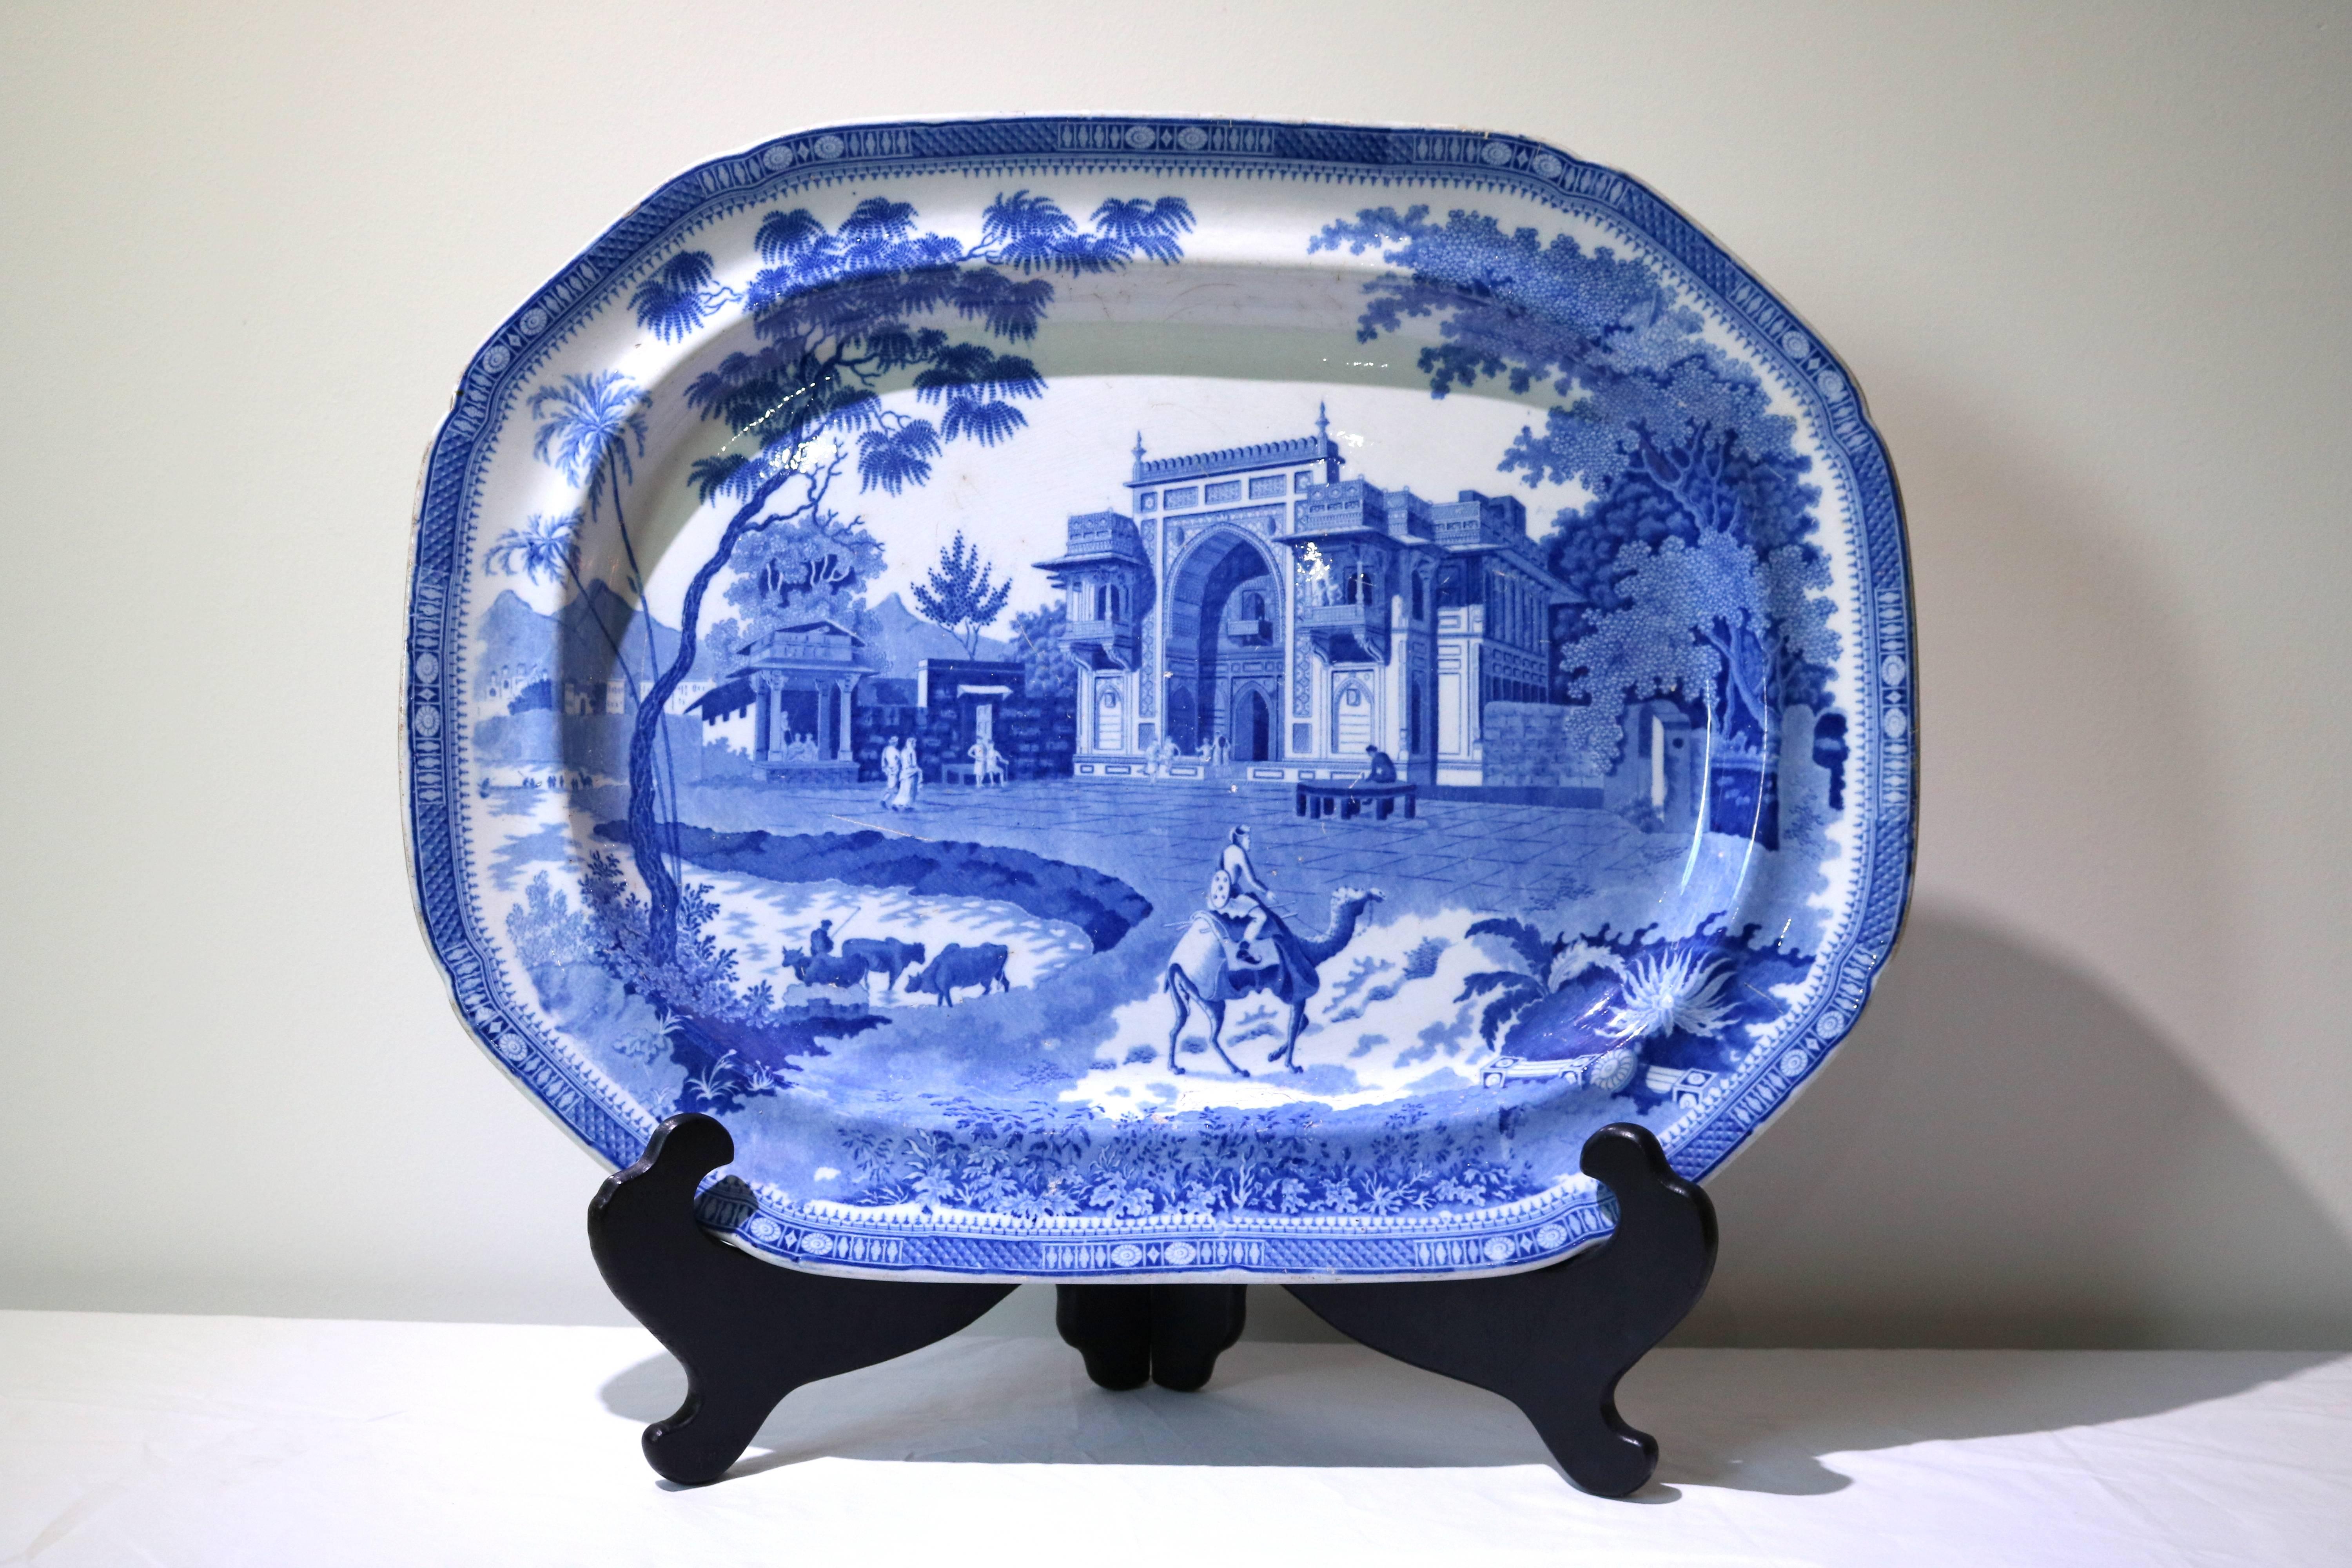 This large-scale serving platter dates from the 1840s and was purchased in London. The blue transfer-ware pattern depicts an exotic Indian palace with palms, lakes, camels, cows and attendants.

Please feel free to contact us directly for a